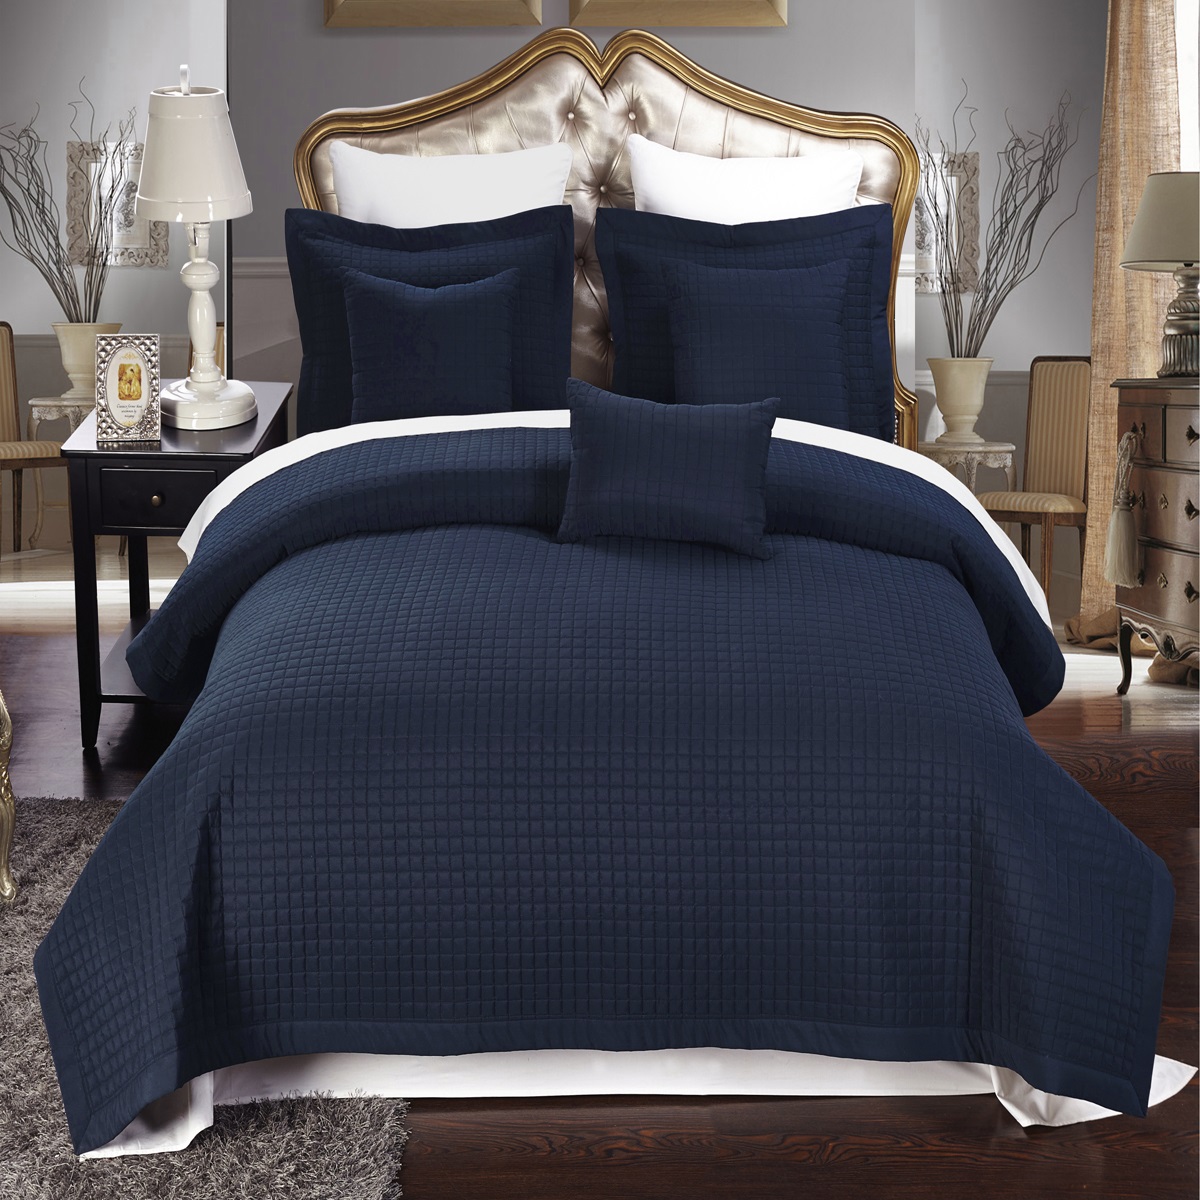 Golinens Luxury Navy Checkered Quilted Wrinkle Free Microfiber 6